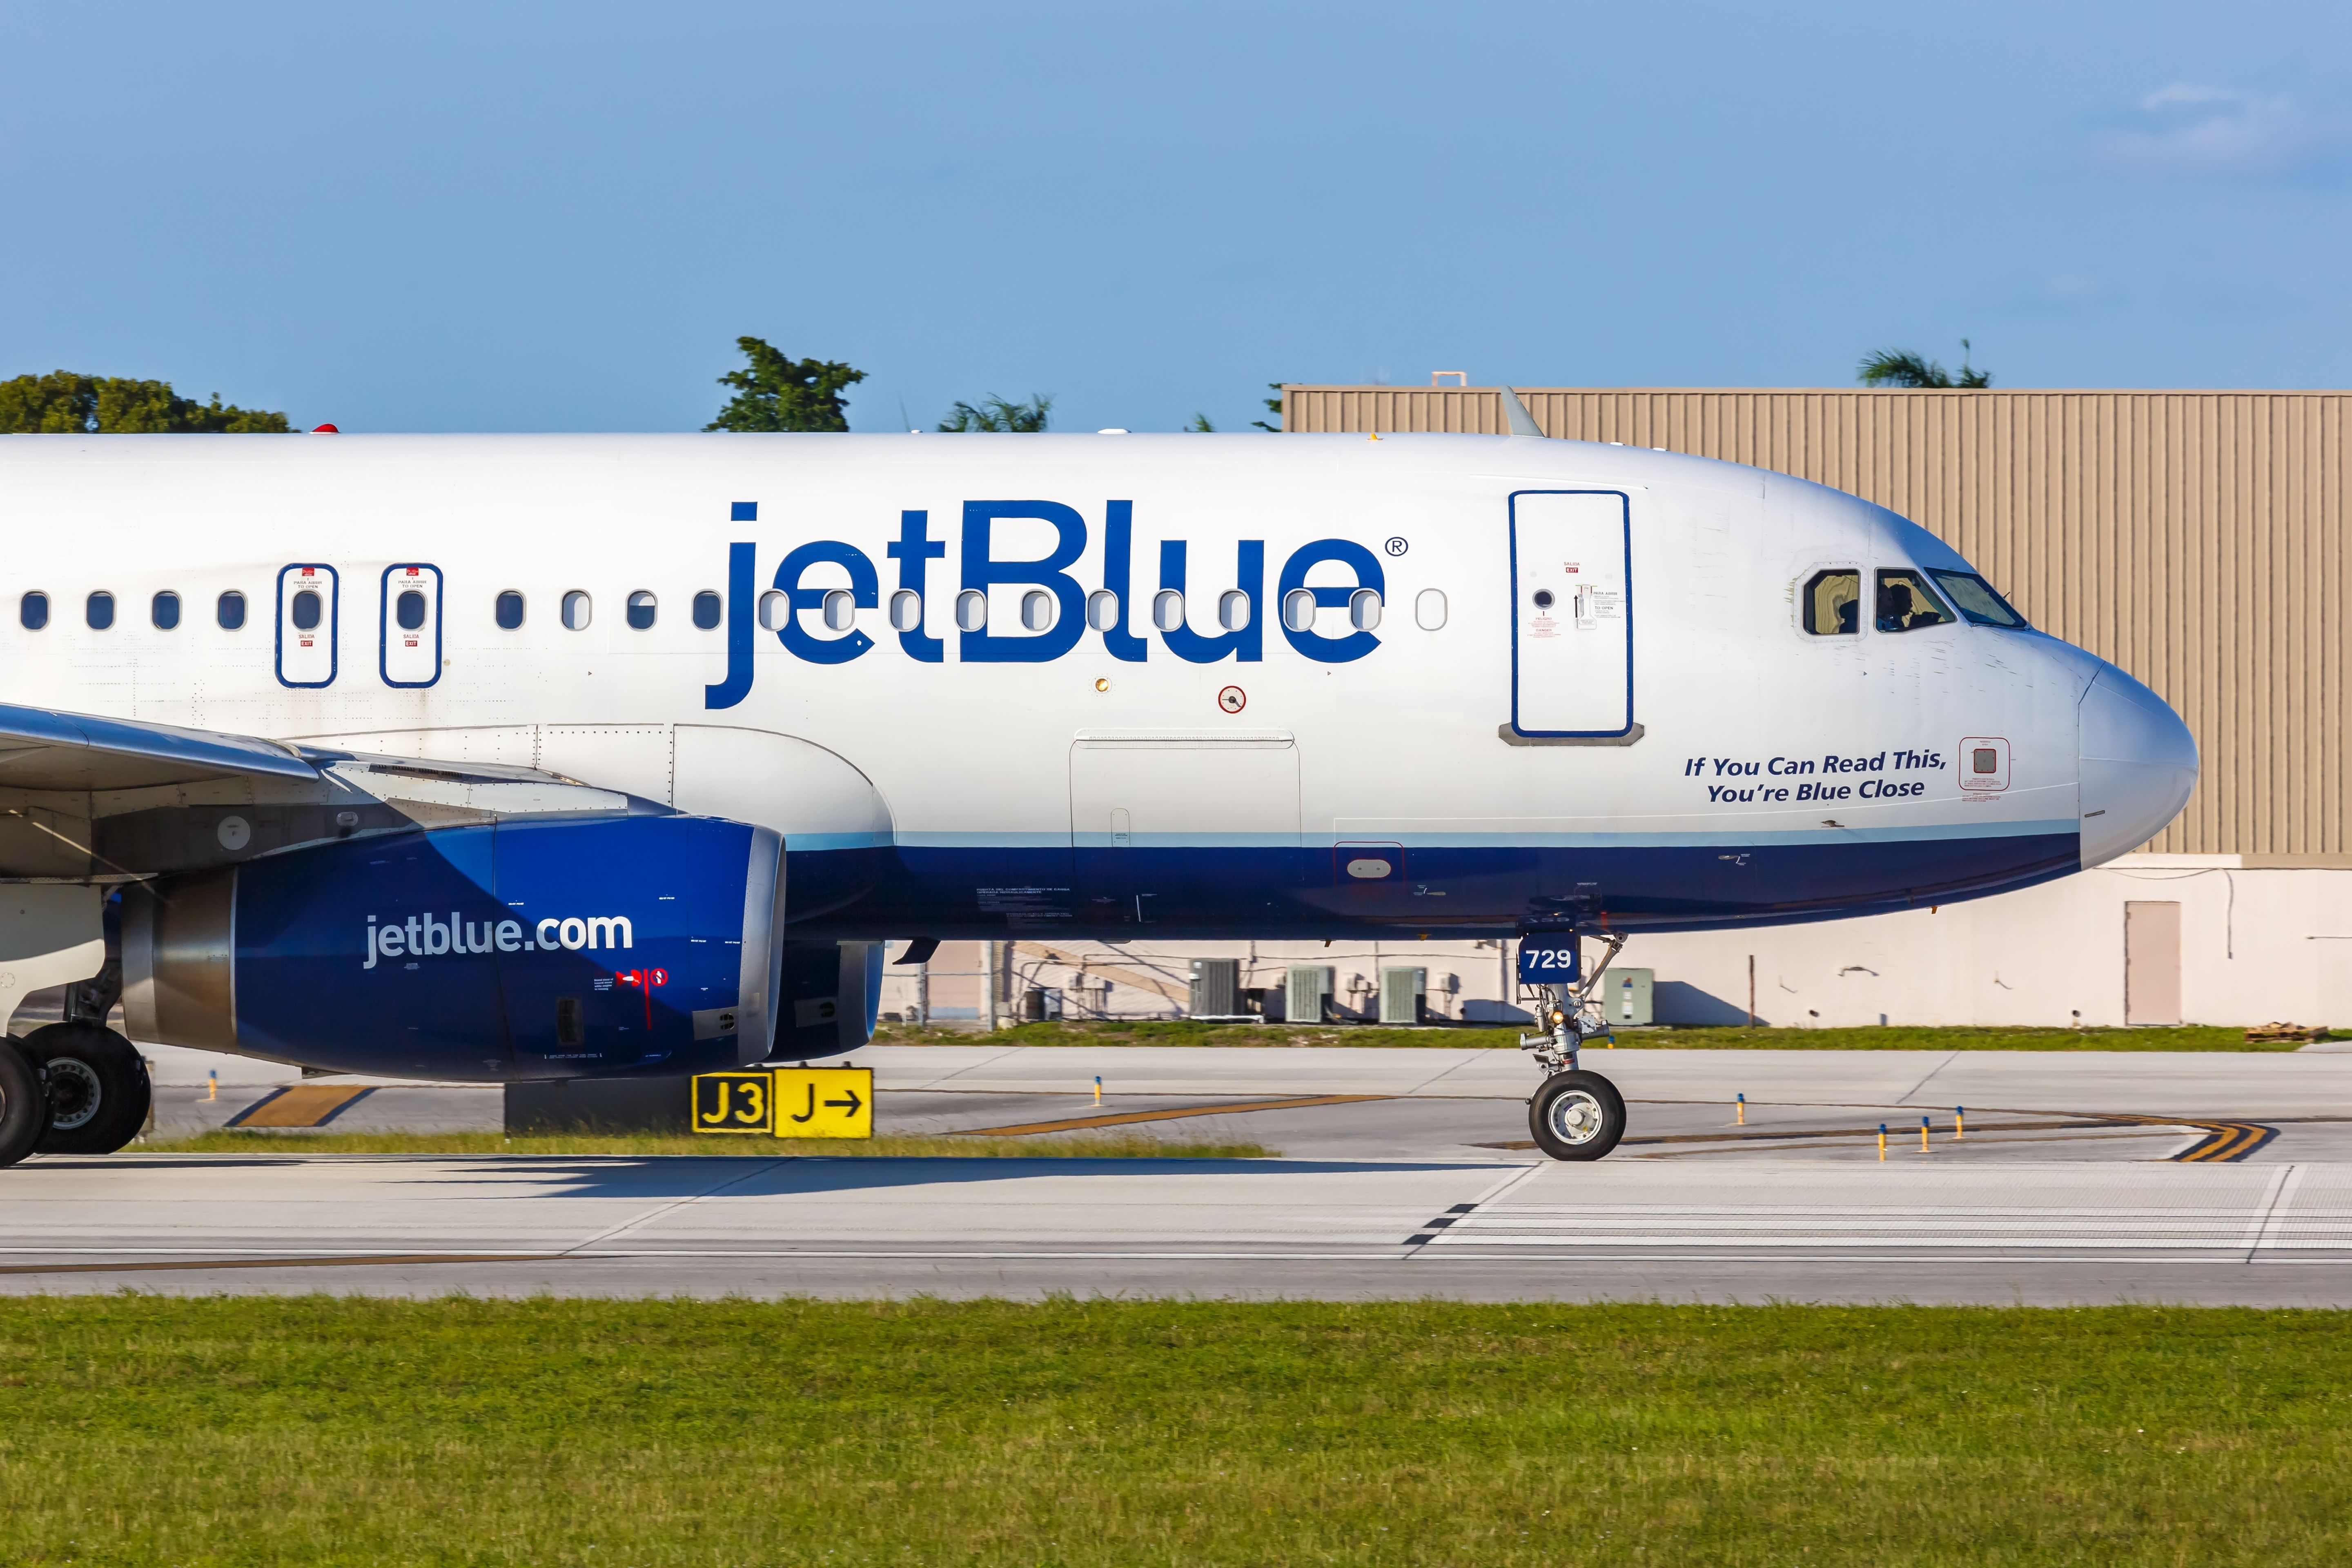 JetBlue Airbus A320 on the runway at Hollywood Fort Lauderdale International Airport FLL